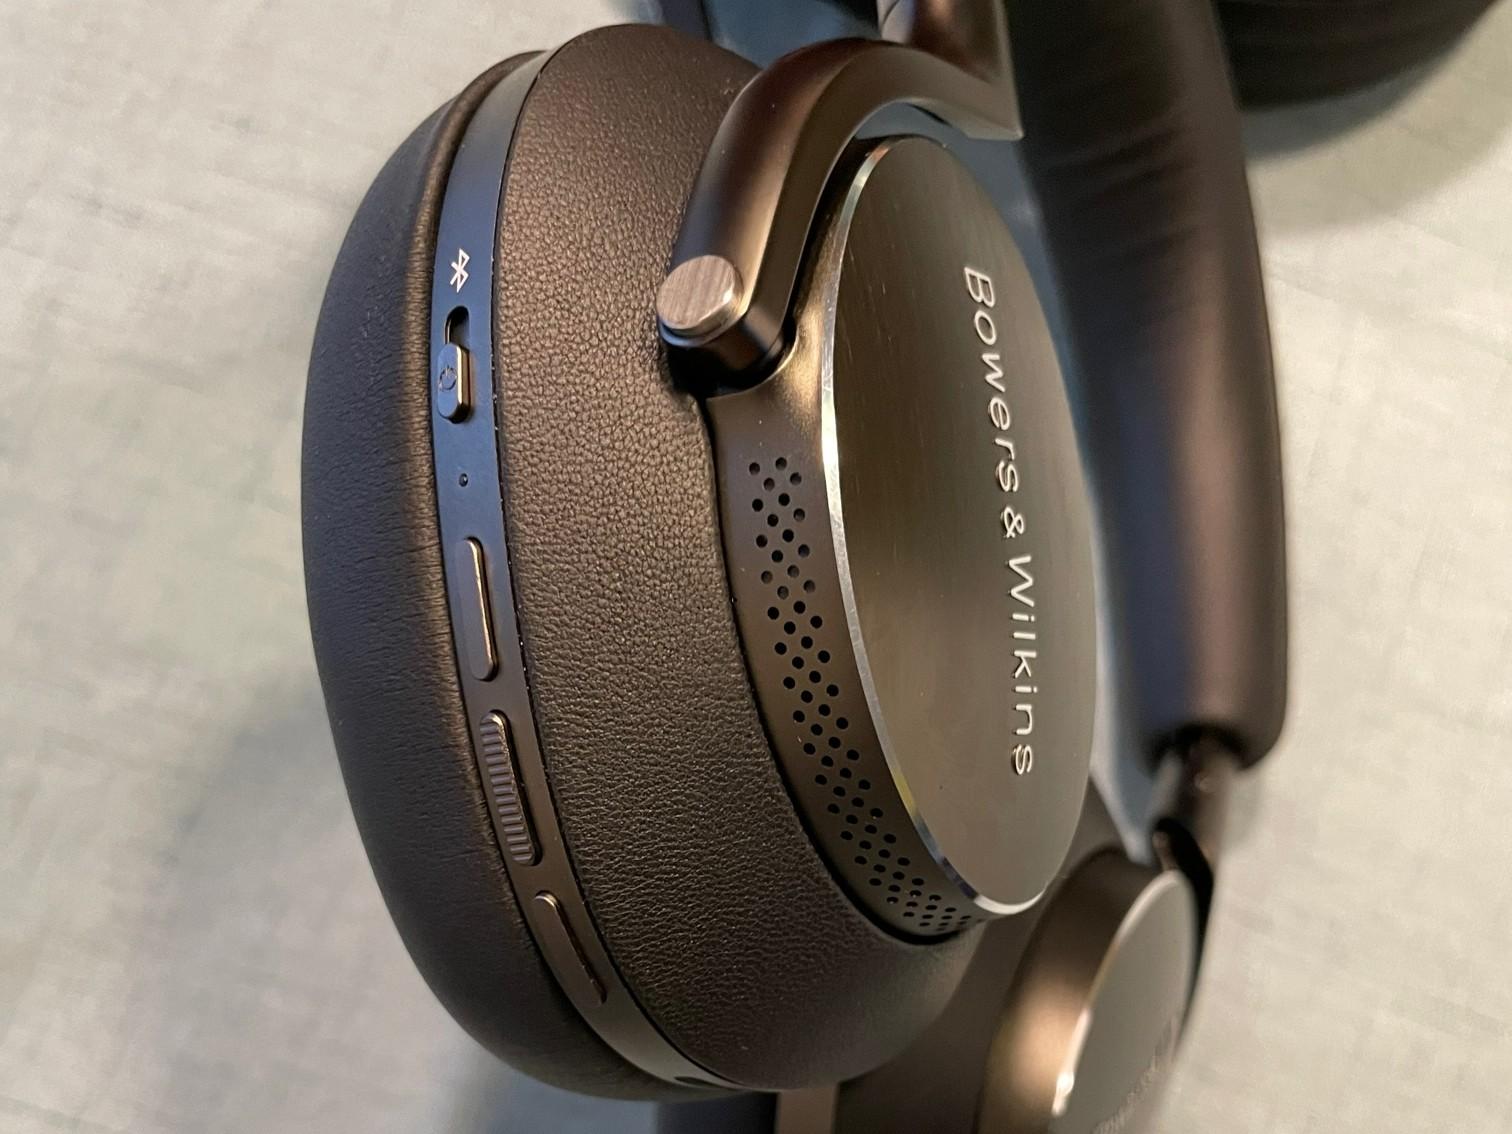 Bowers and Wilkins PX8 Headphones side earcup controls edit